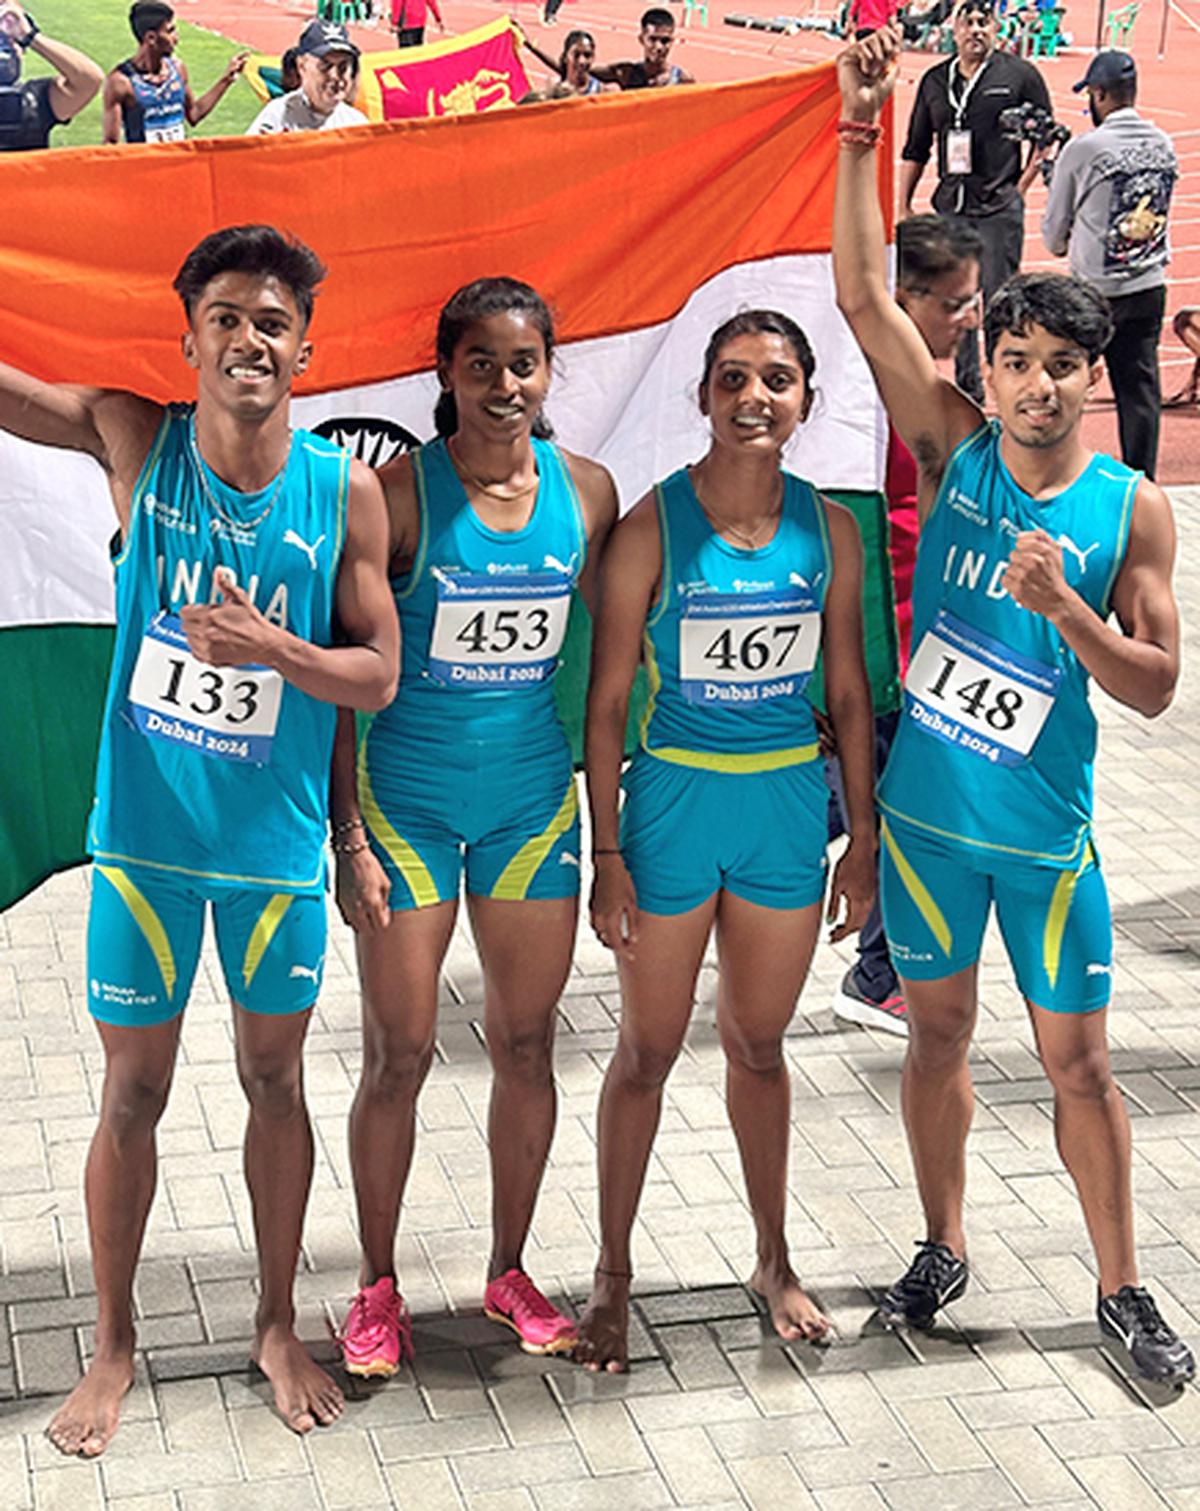 The Indian 4x400m mixed relay team took the silver.